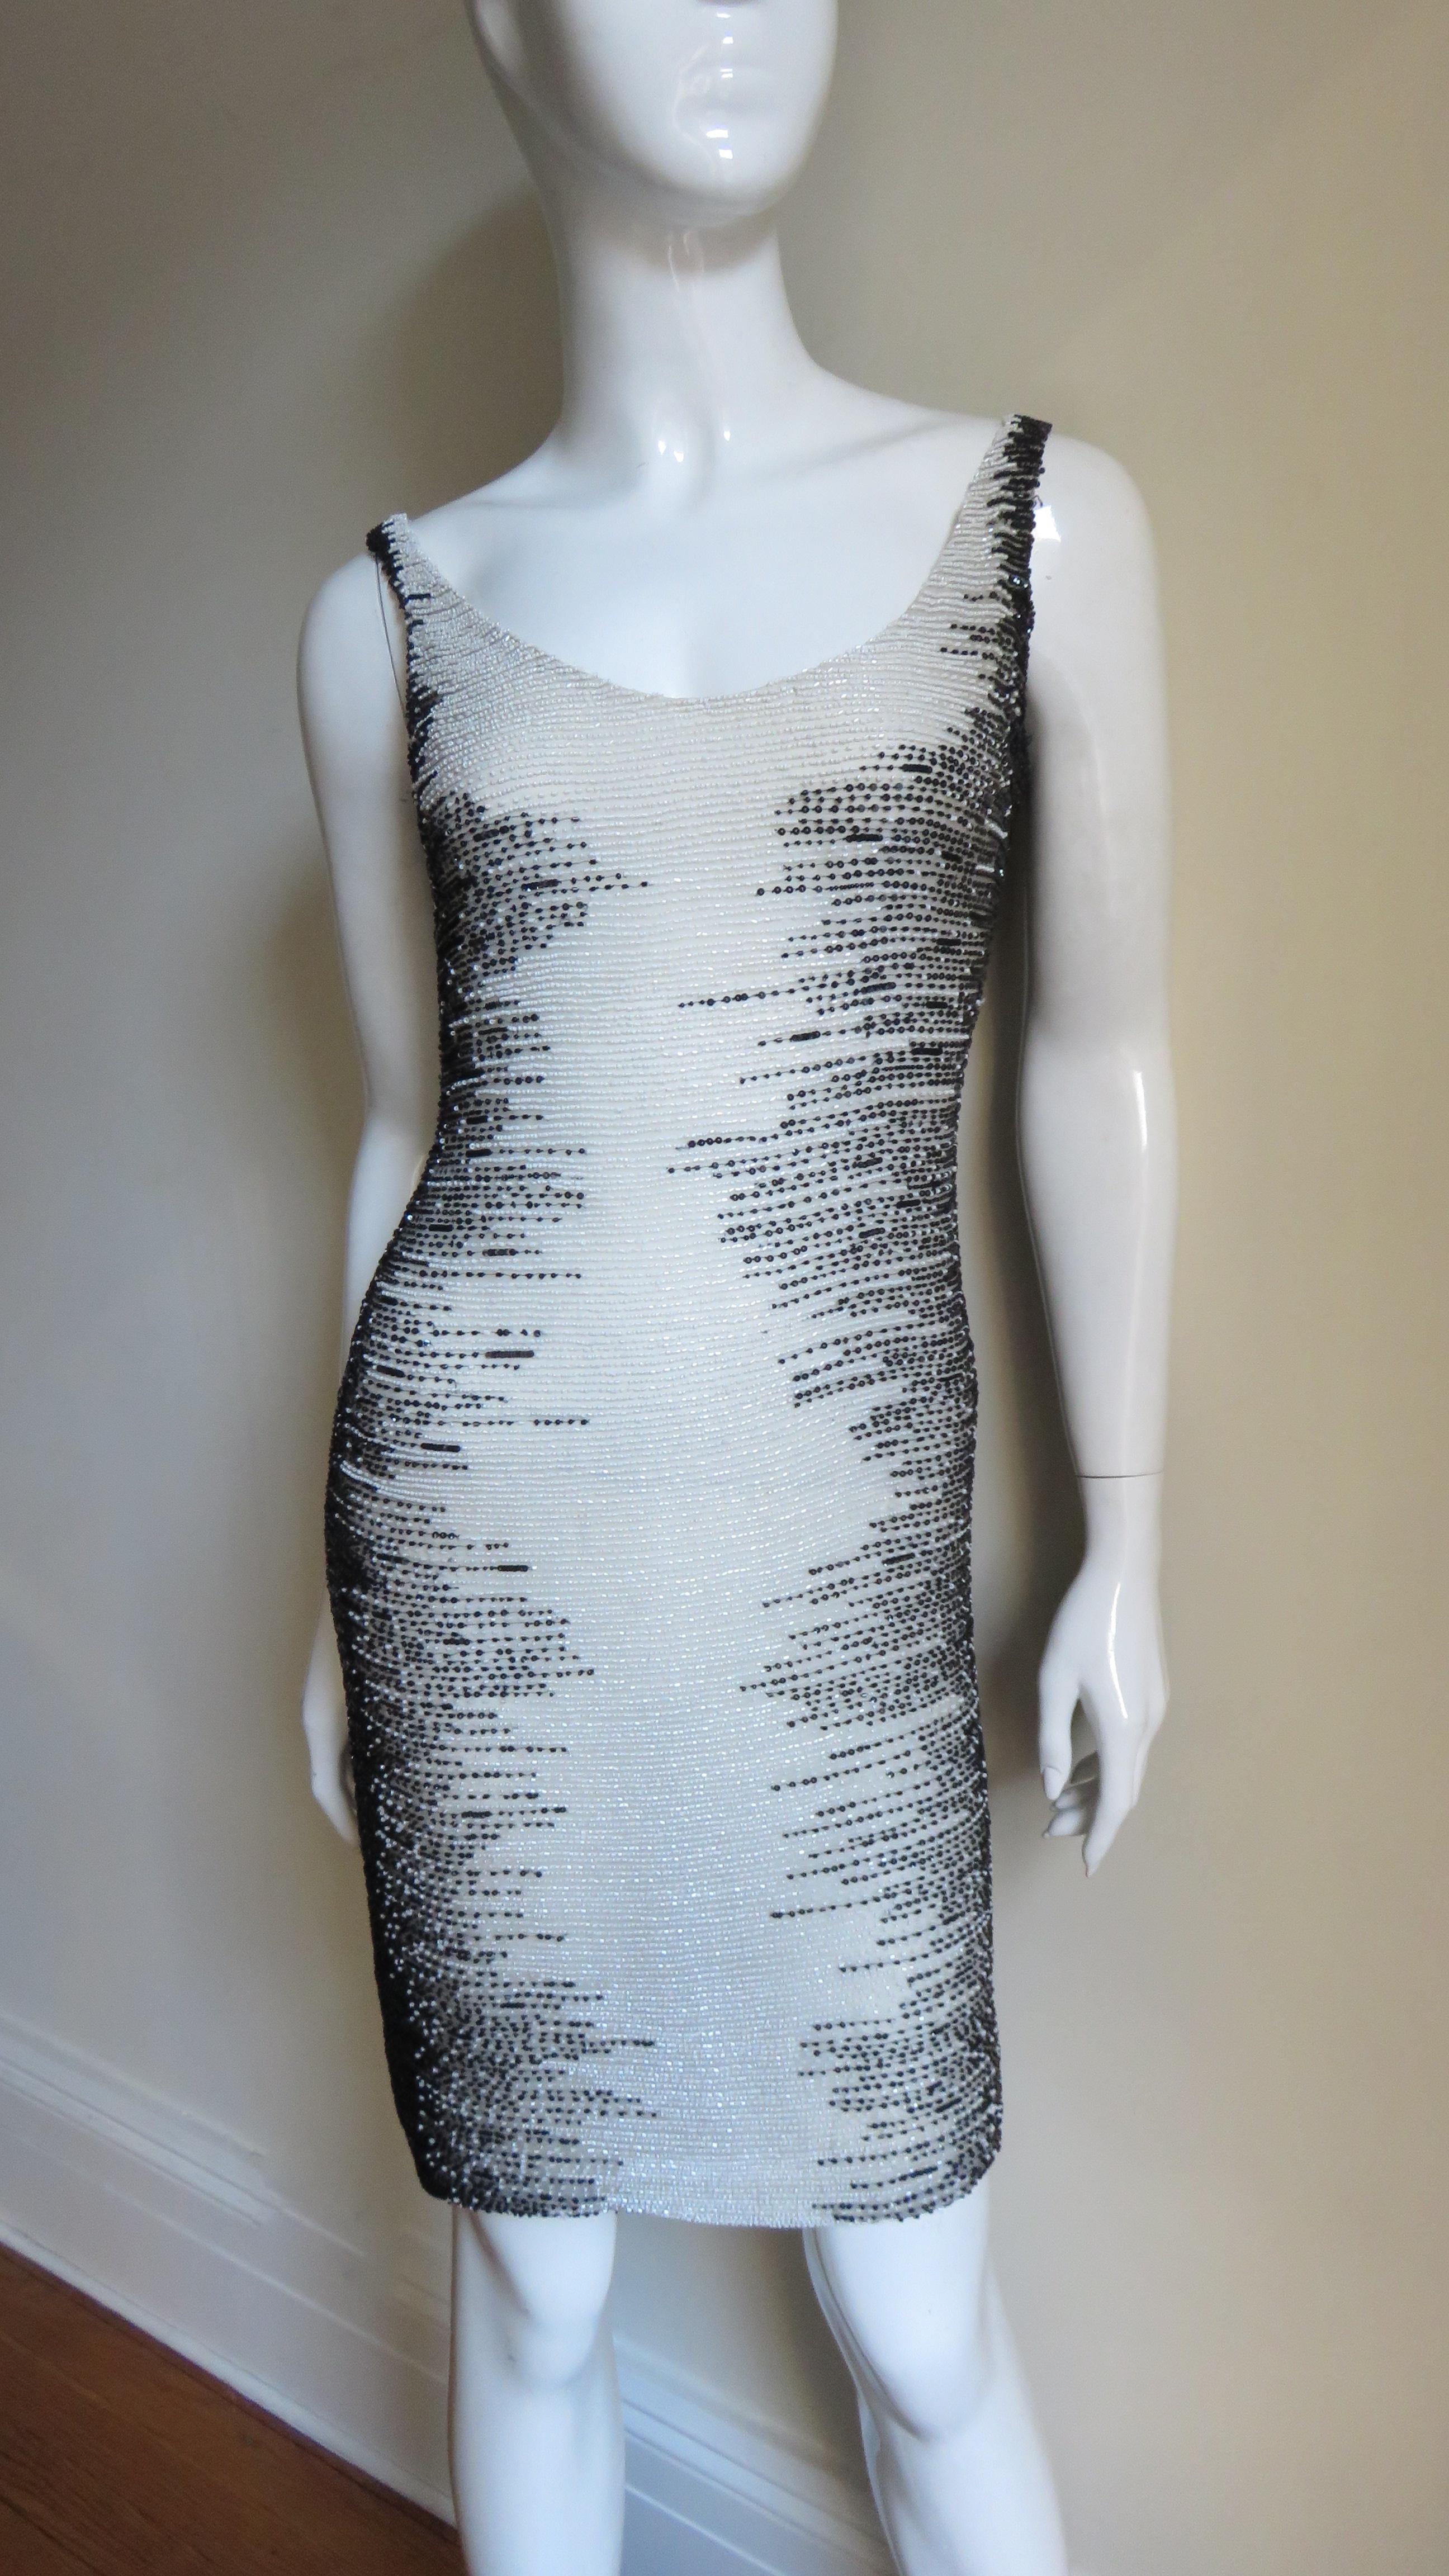 A fabulous off white silk dress completely beaded in black and off white from Valentino Boutique.  It has a scoop neckline front and back skimming the body and is completely covered in rows of off white and black fine glass beads with the black at